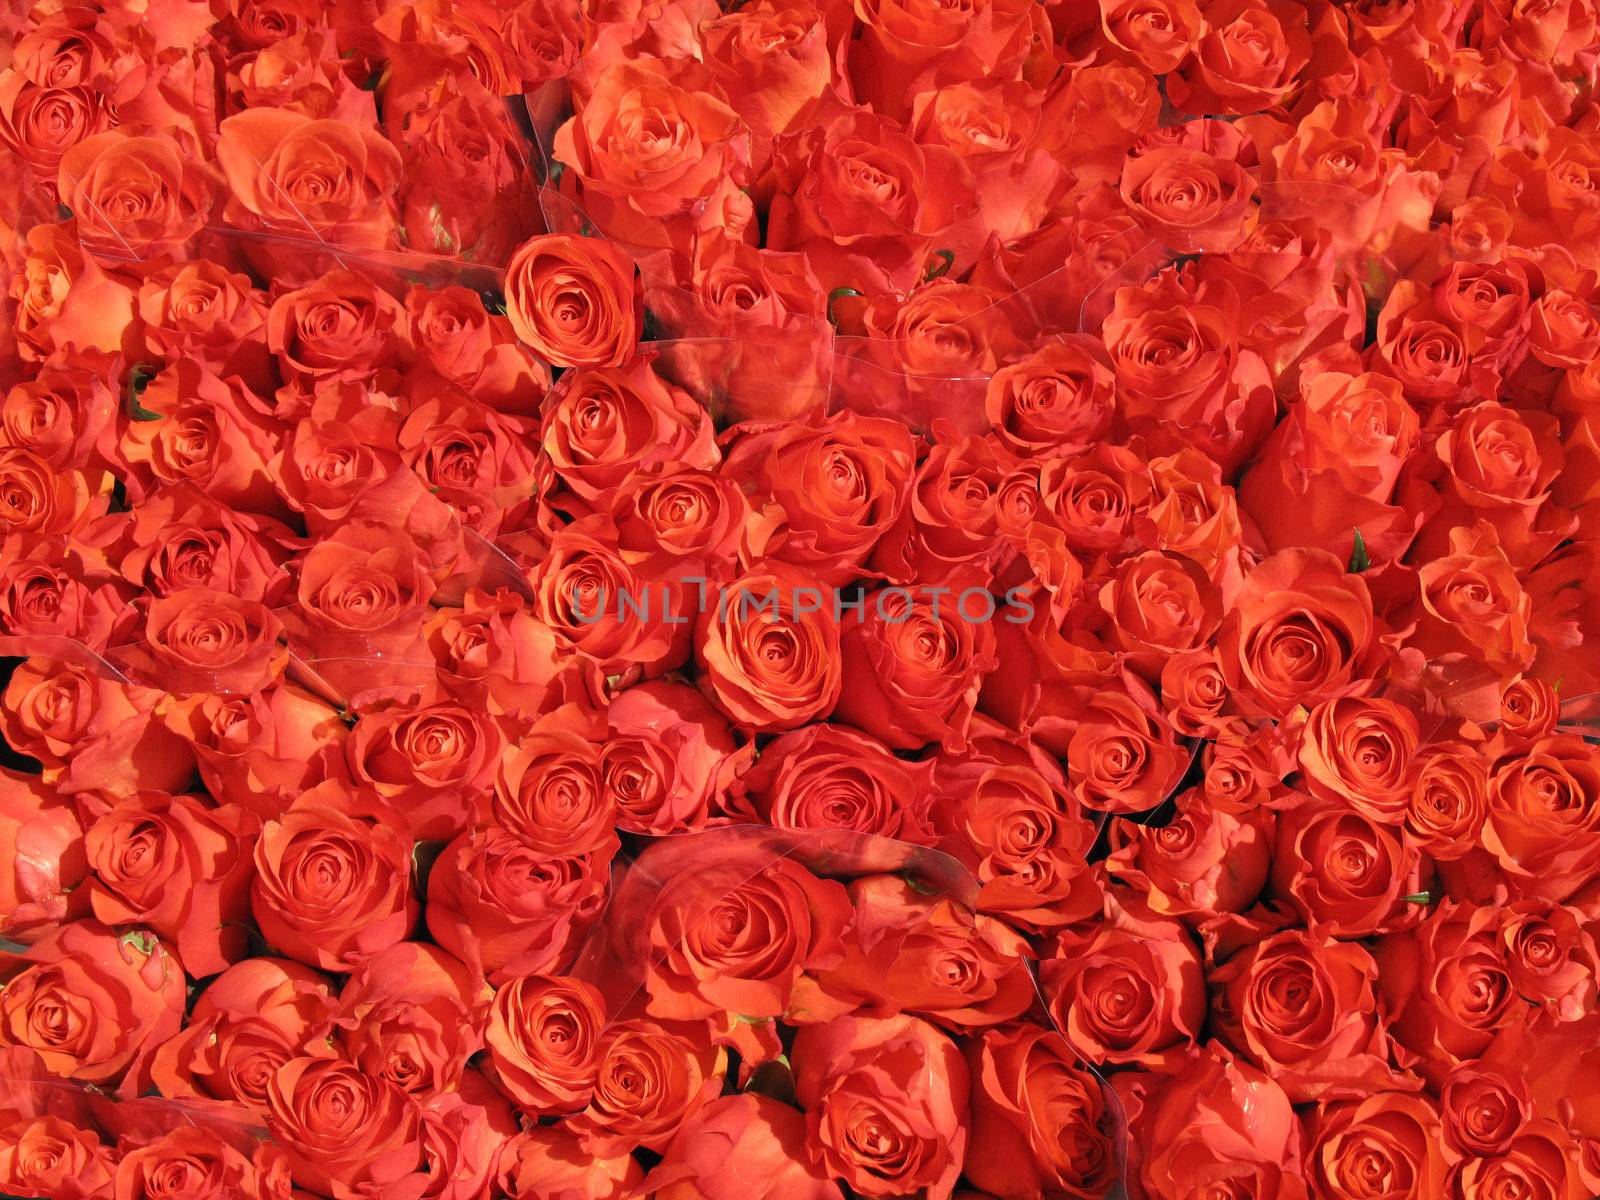 Bunches of red roses for sale - Denmark.